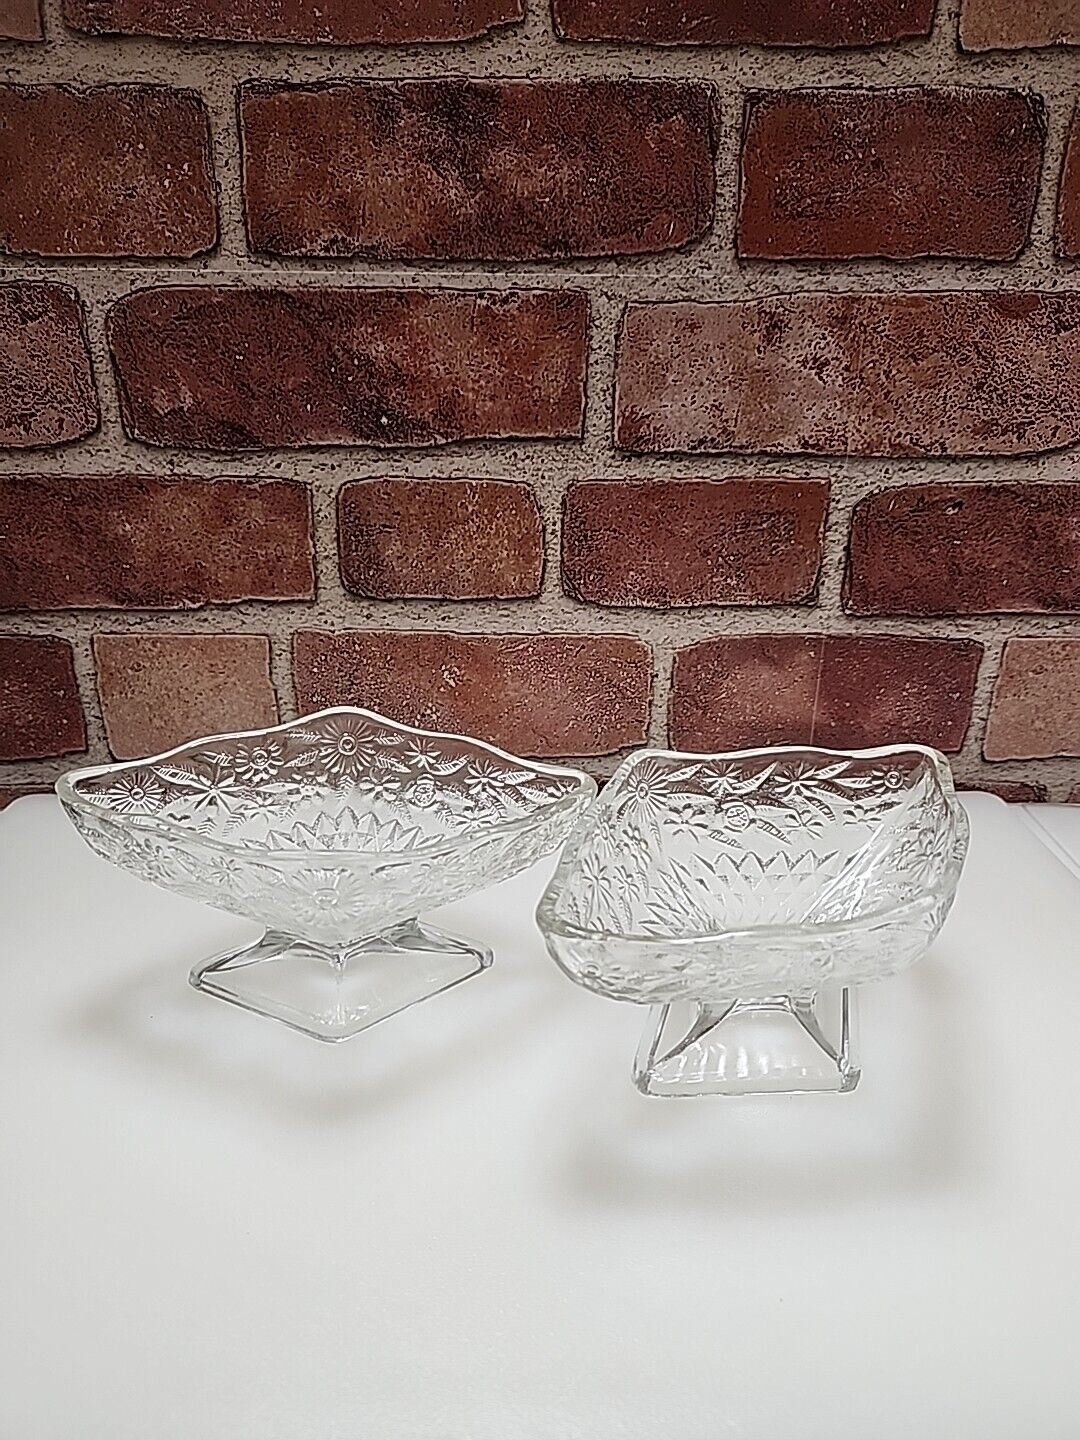 2 Indiana Glass Pineapple & Floral compote footed candy dish Depression diamond